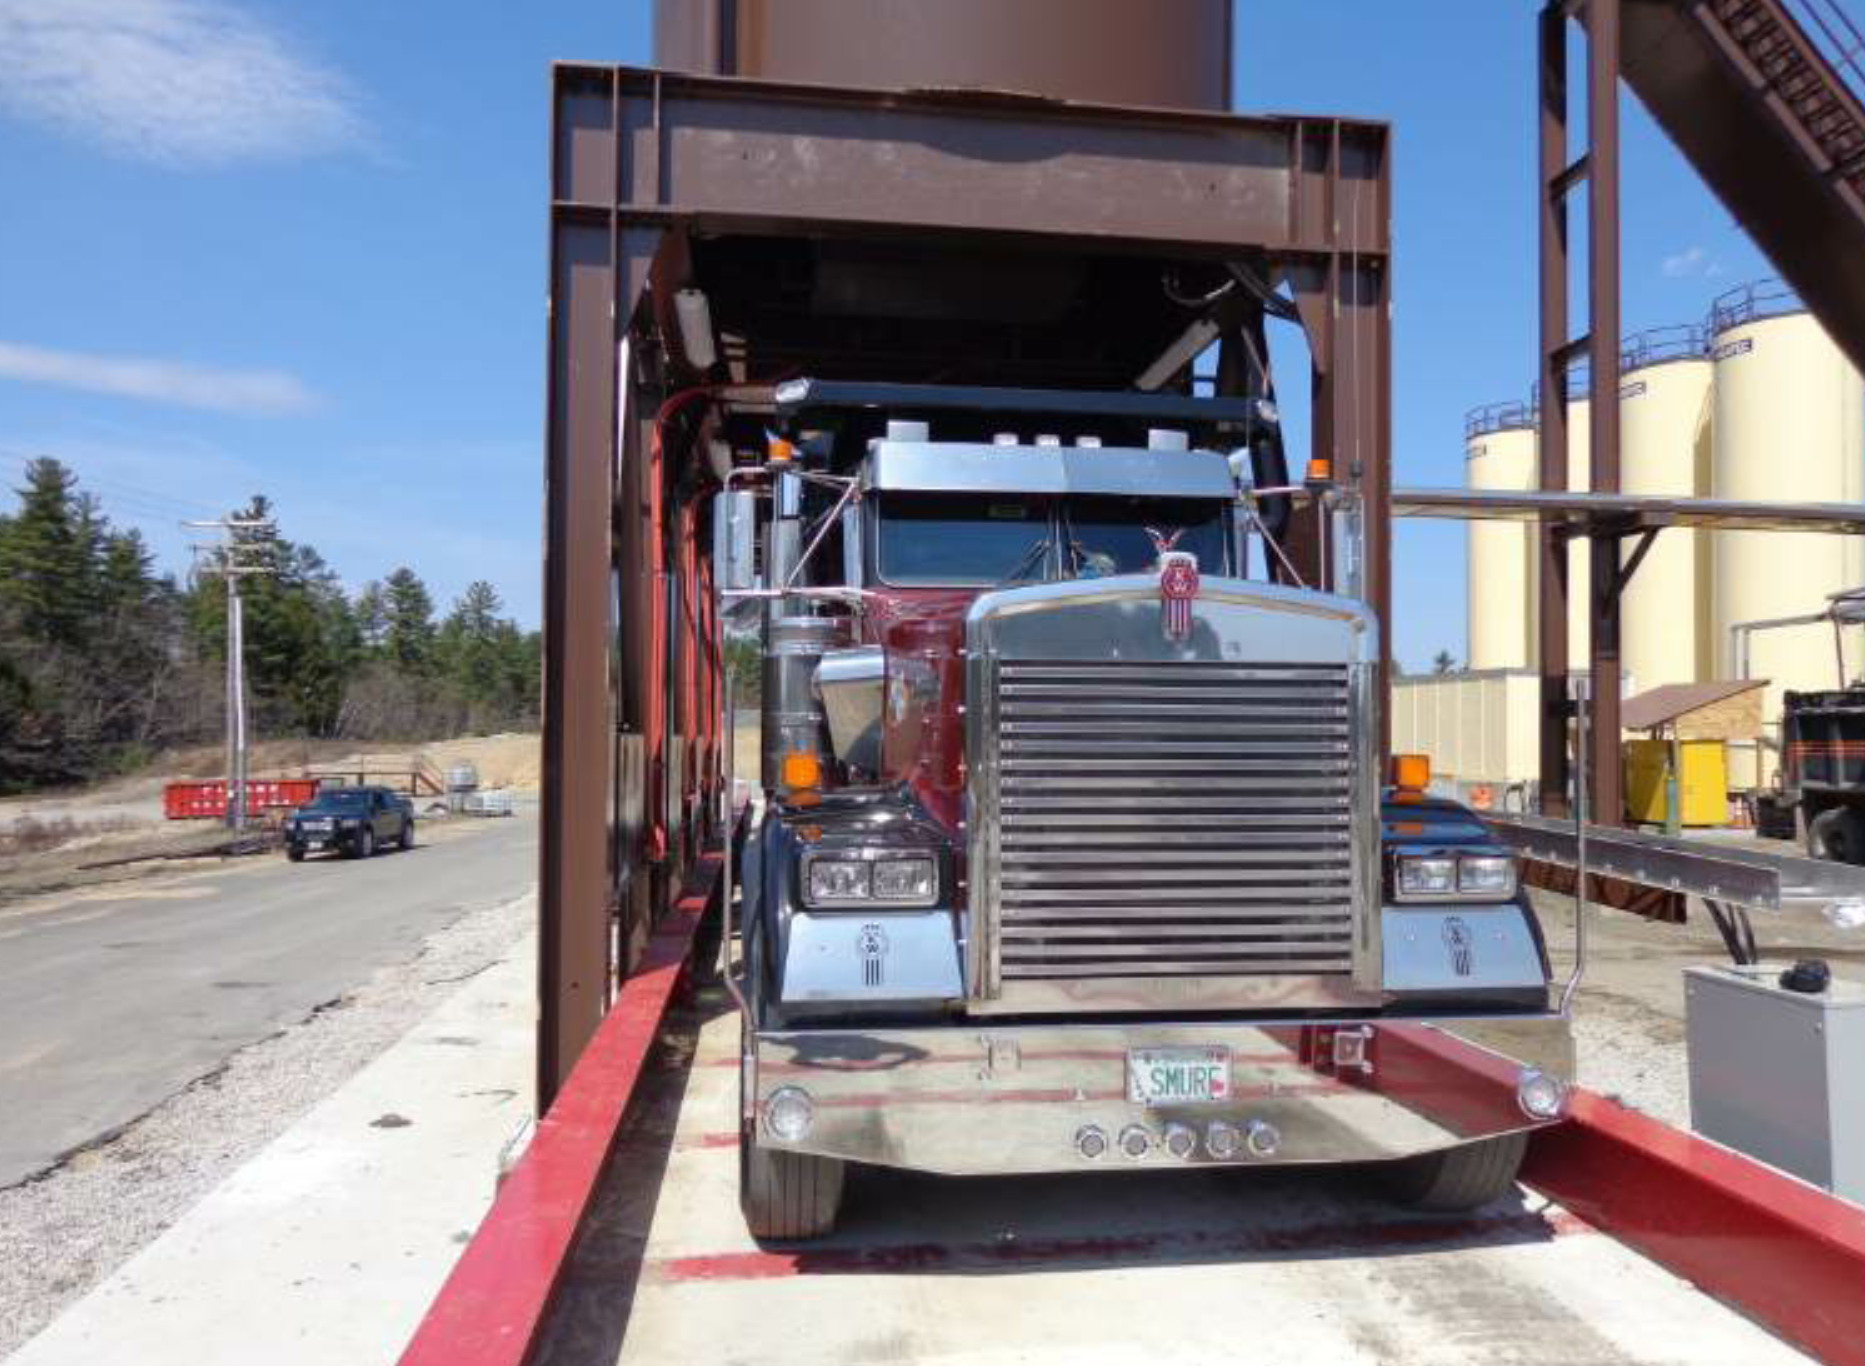 In this picture, you can see extra lights and mirrors on the front of Murray’s truck. He includes lights atop the mirrors and at the corners of the body. Convex mirrors provide extra visibility of areas that would otherwise be blind spots. All photos courtesy John Ball, Top Quality Paving & Training, Manchester, New Hampshire.